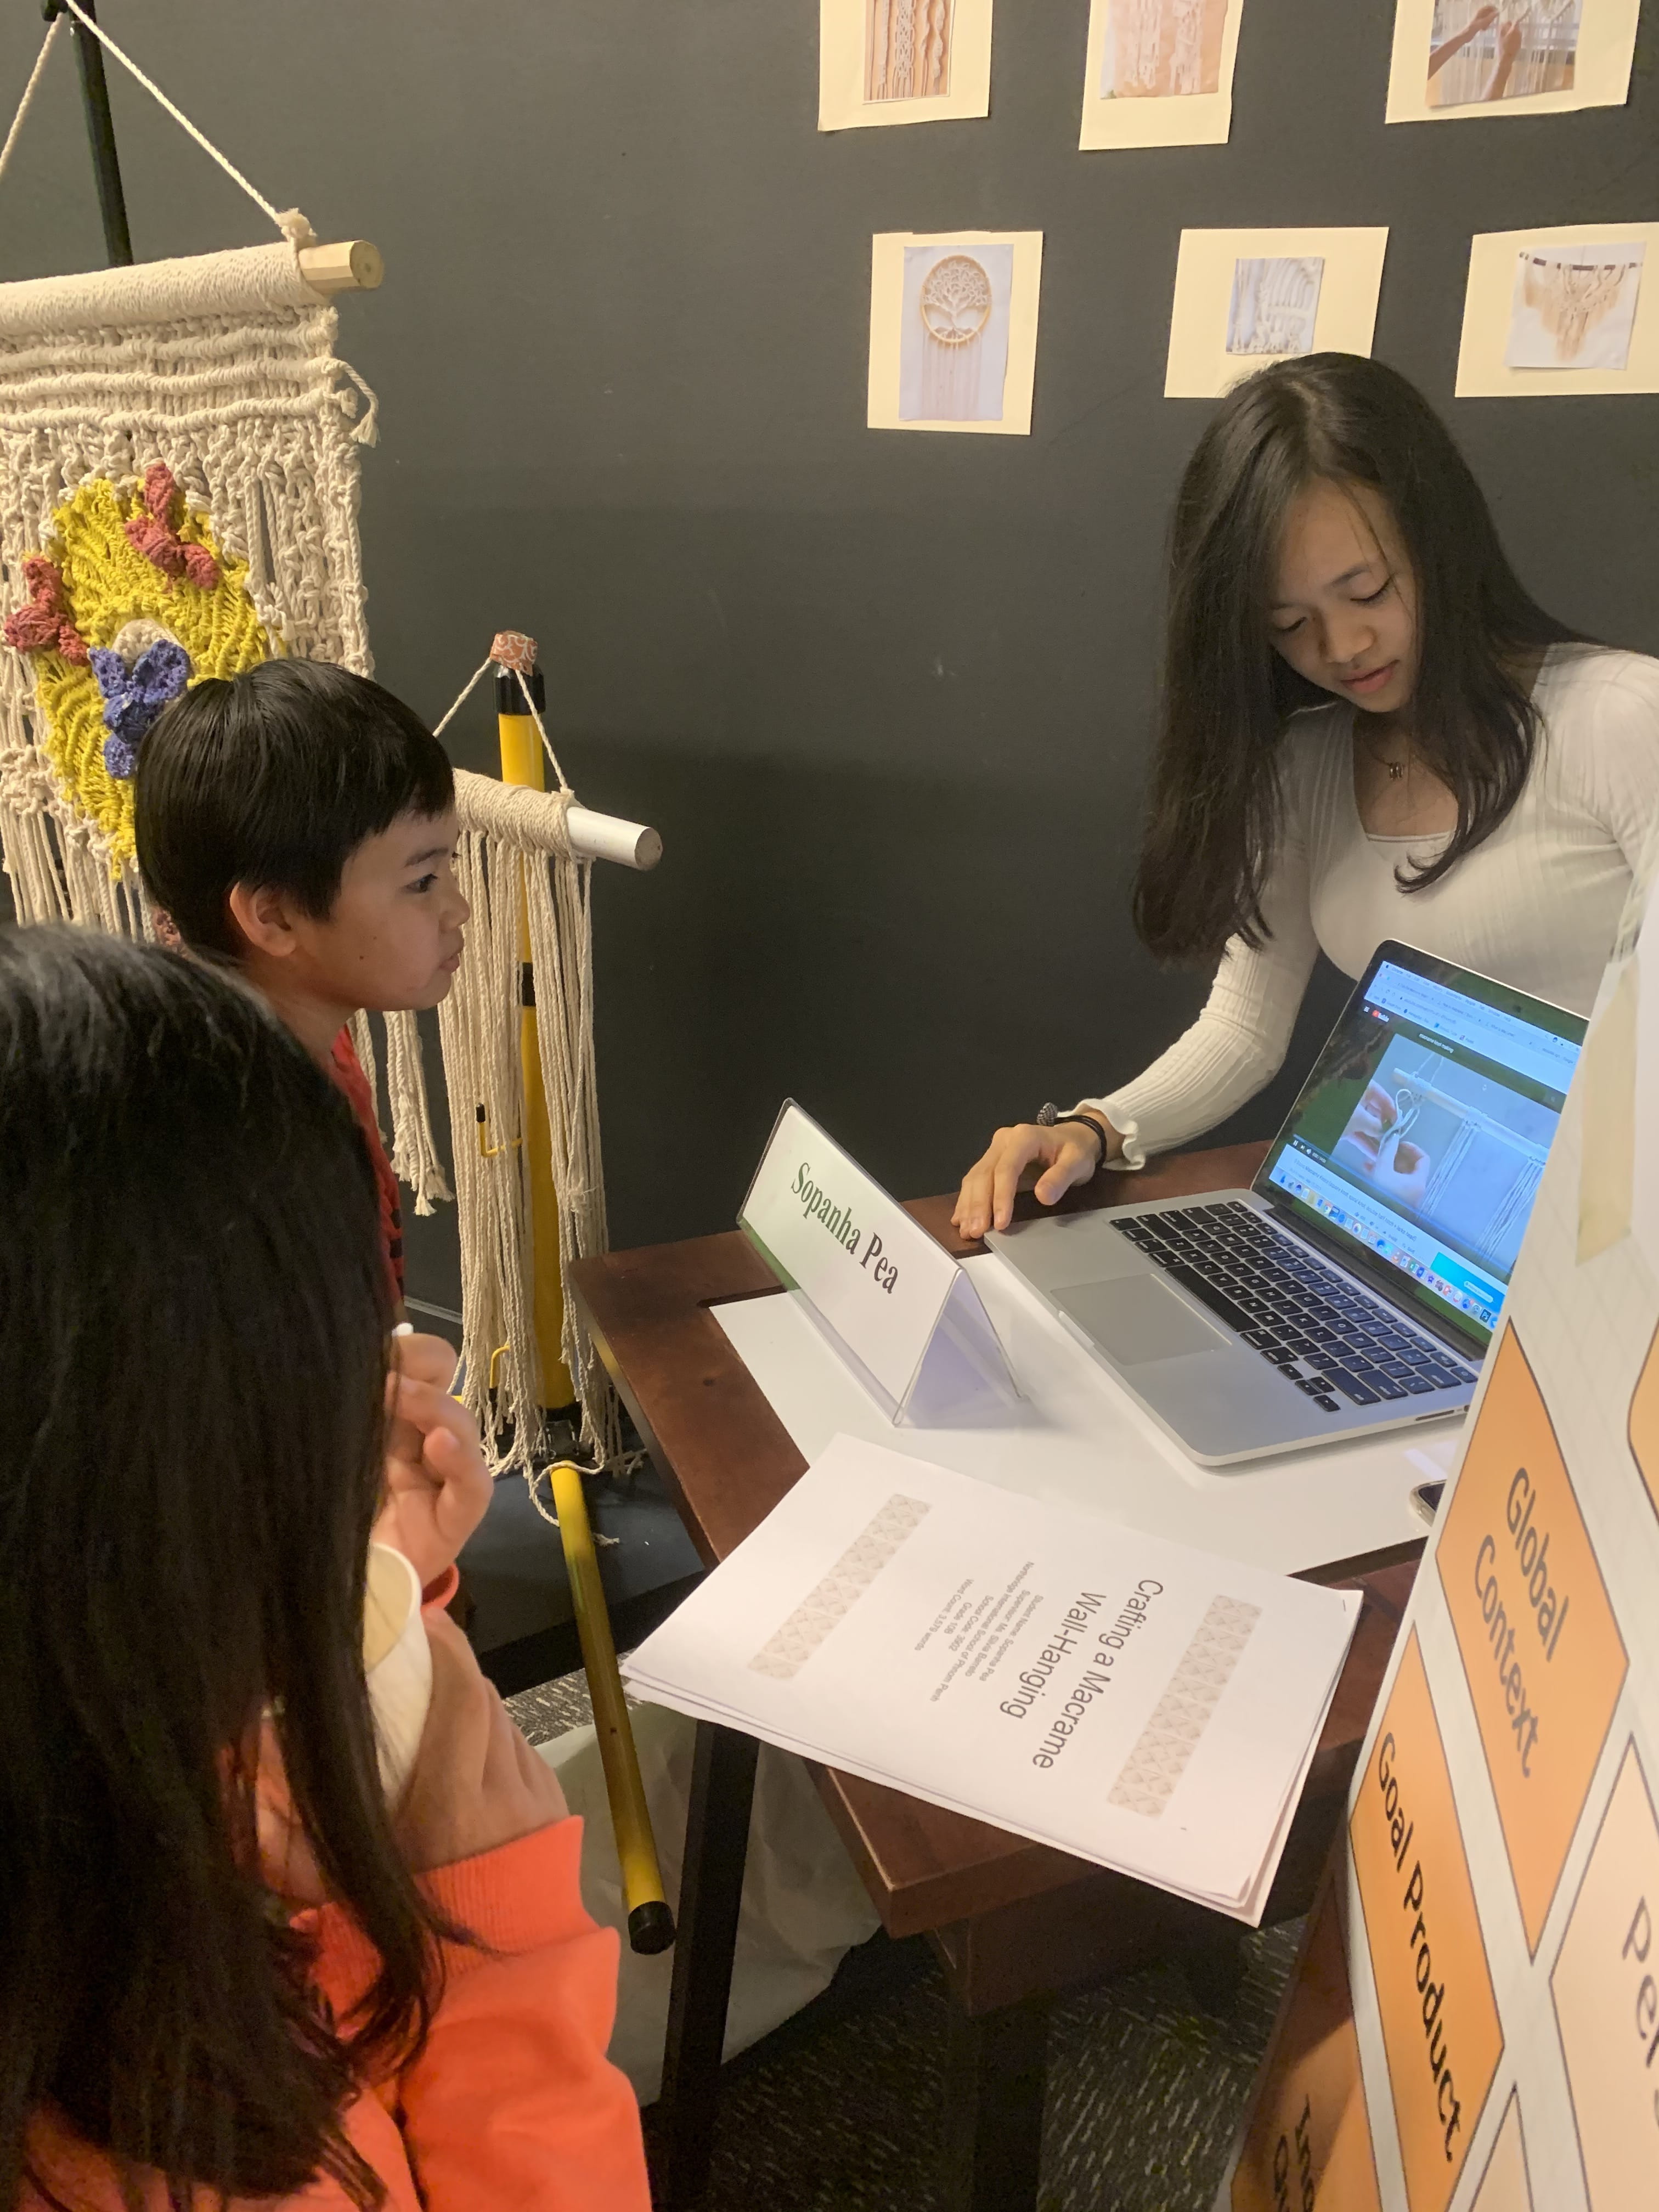 Northbridge IB MYP students recently showcased their fabulous Personal Projects at school-northbridge-ib-myp-students-recently-showcased-their-fabulous-personal-projects-at-school-IMG_2534